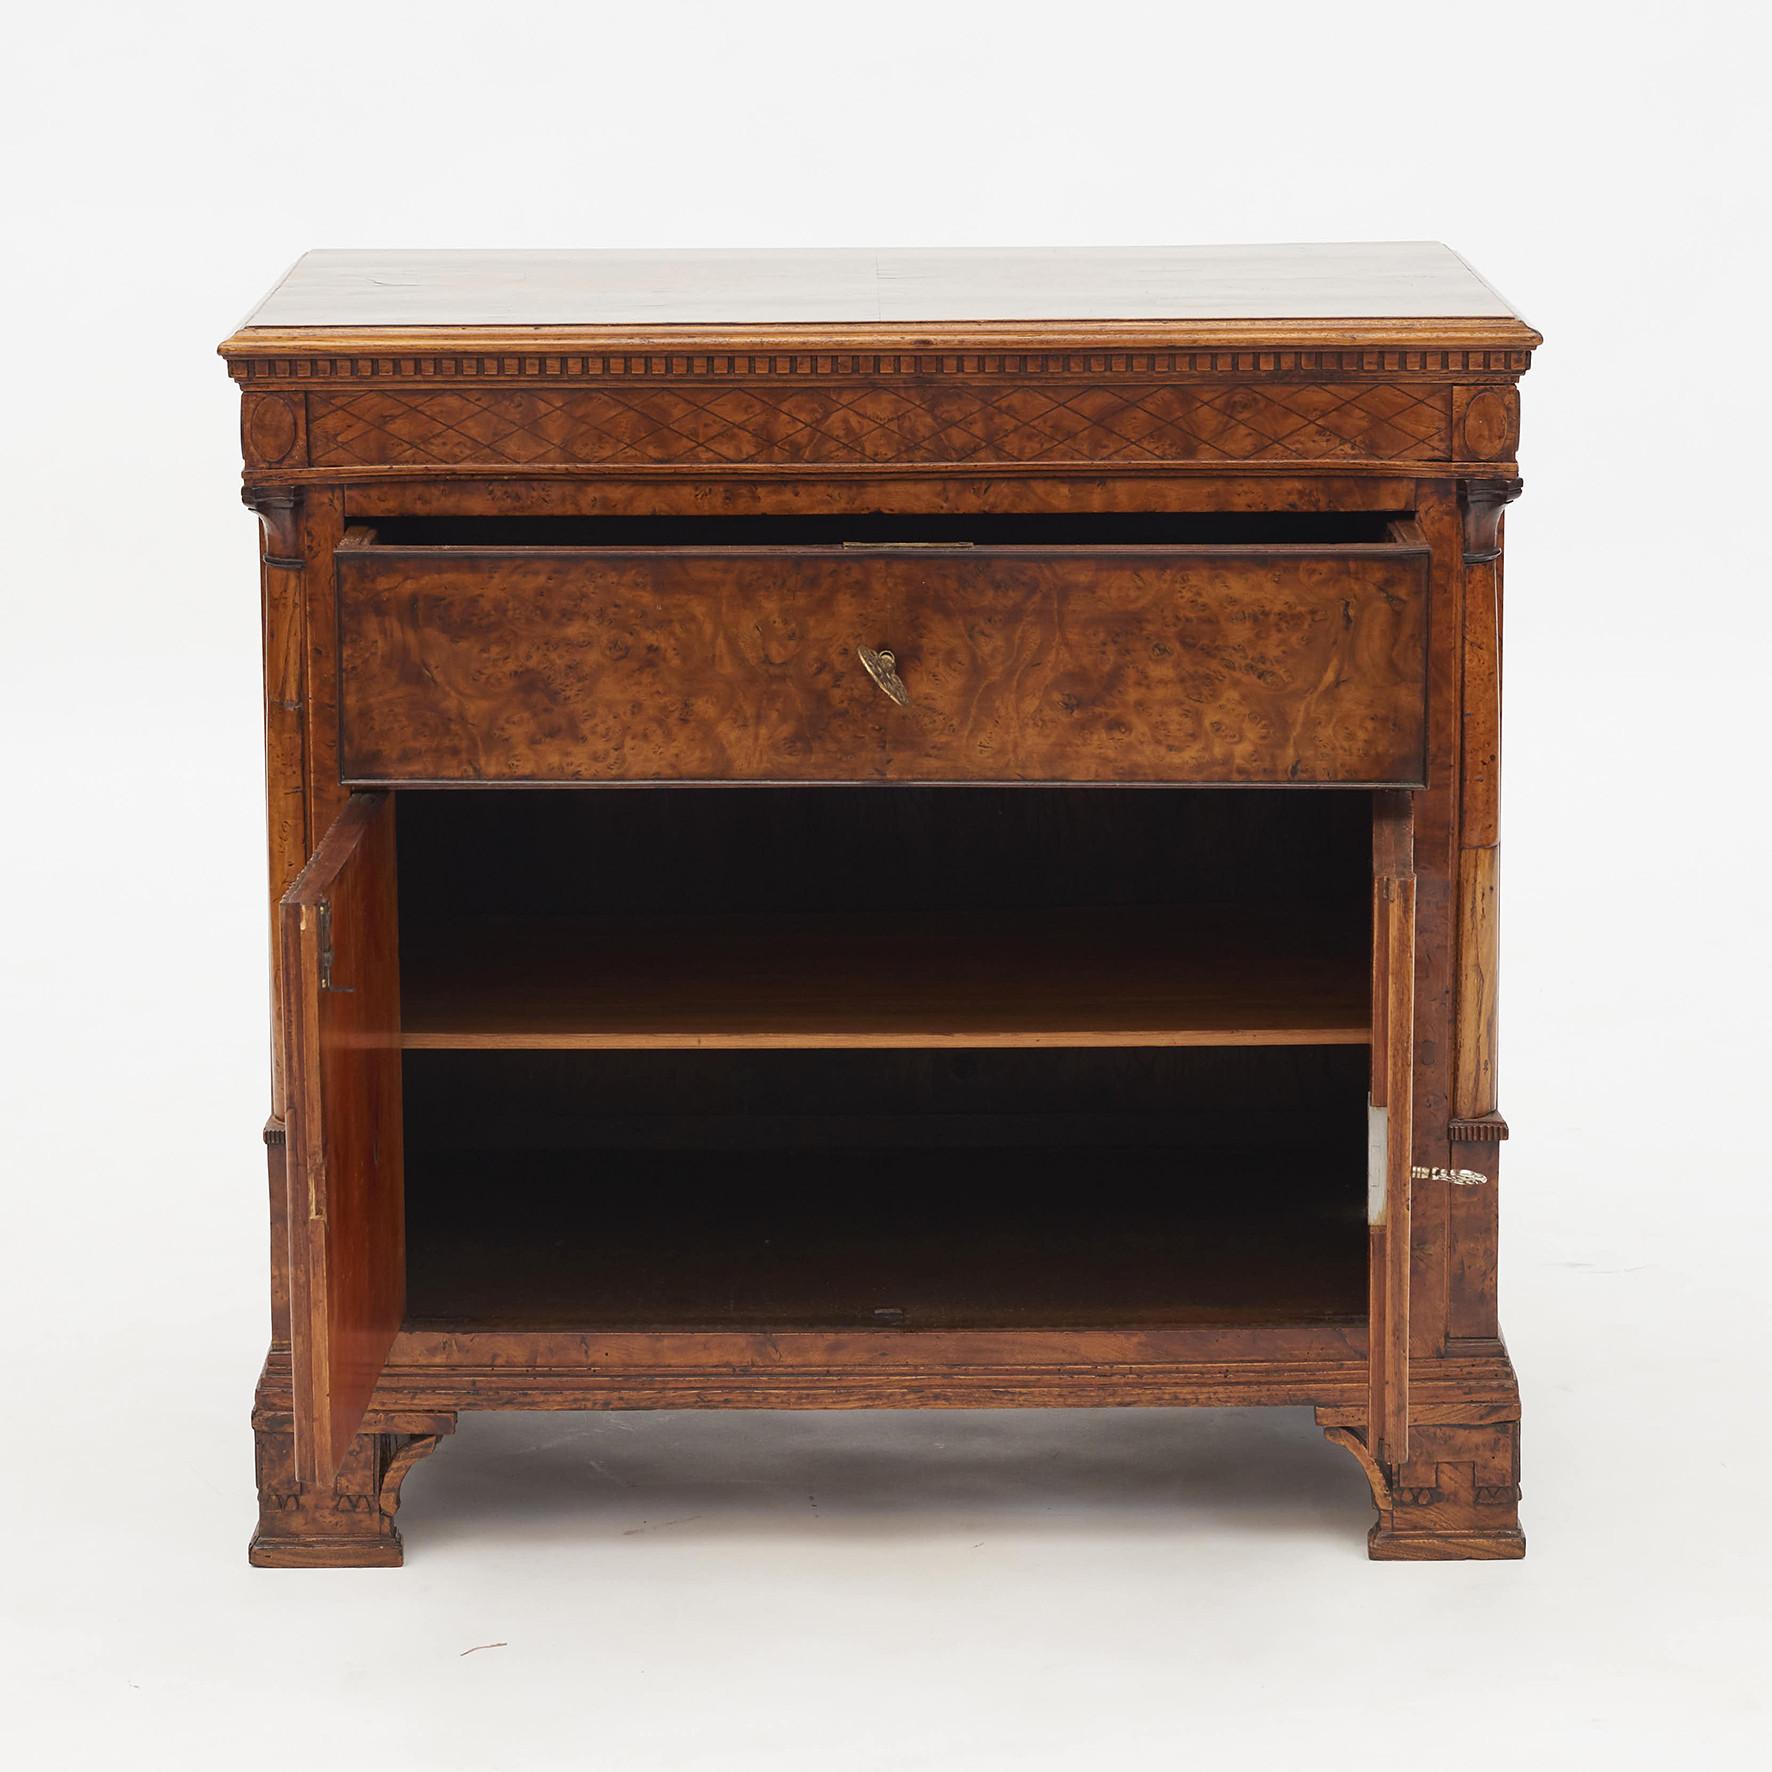 Elm burl veneered Louis XVI commode / dresser with many elegant details. Pair of fluted doors under a single top drawer. Inside two shelves. Architectural and beautifully executed. Oak and elm burl veneer,
Denmark, circa 1780-1790.